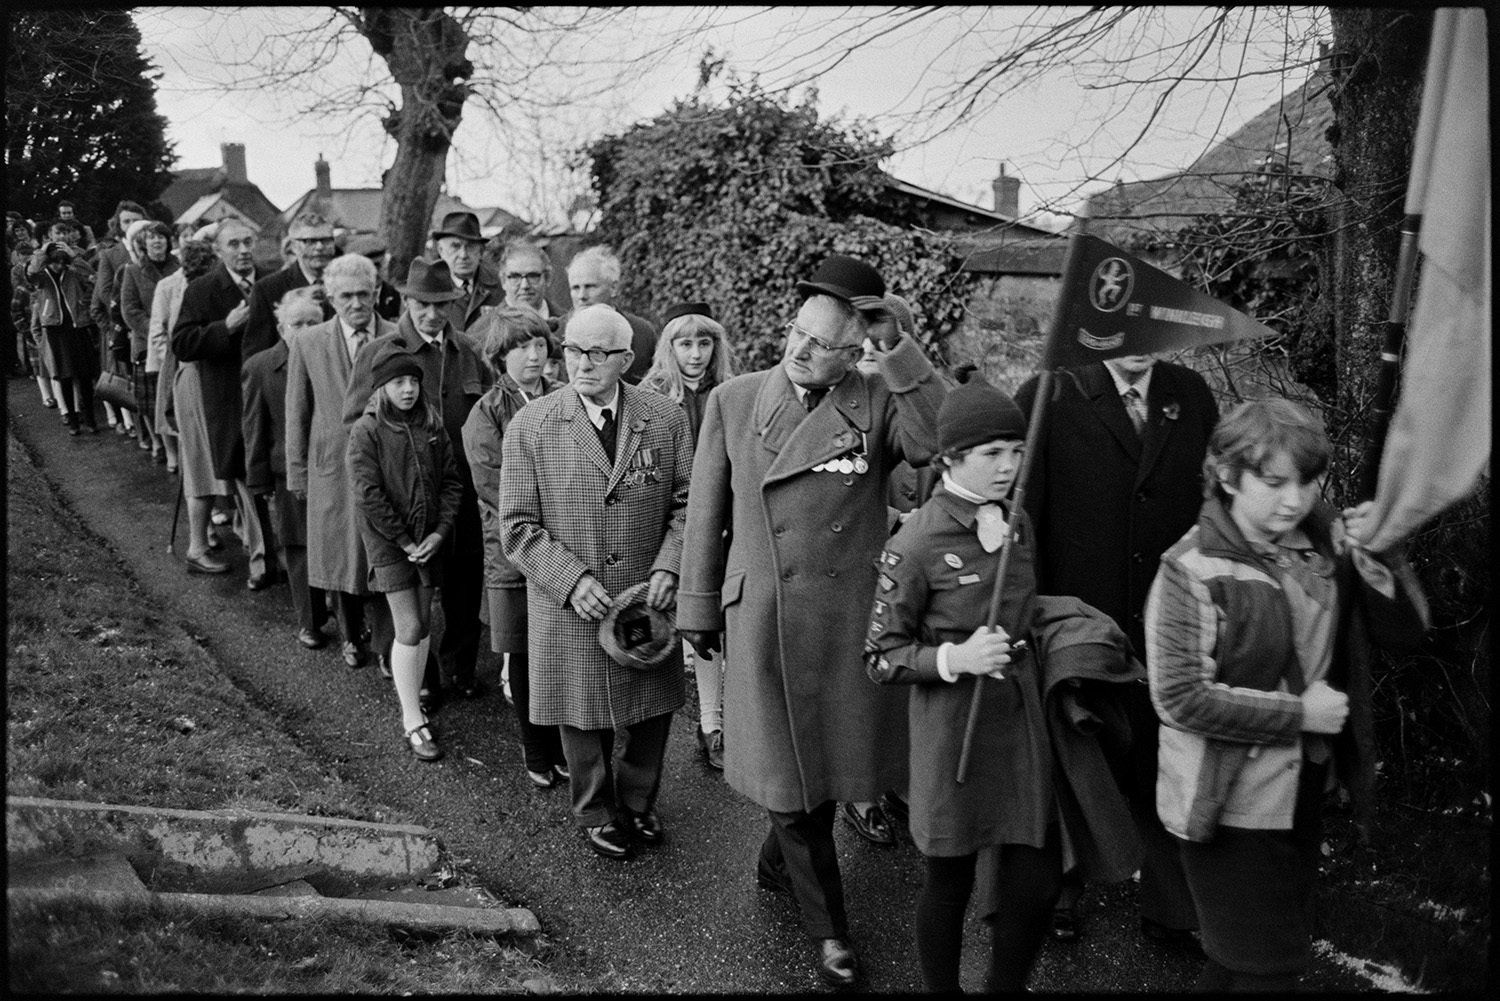 Armistice day parade, women and men, old soldiers in church and parade past memorial, wreaths. 
[Men, women and children walking along the path of Winkleigh Church on Remembrance Day. Some of the children are holding standards or flags. Some of the men are wearing medals on their coats.]